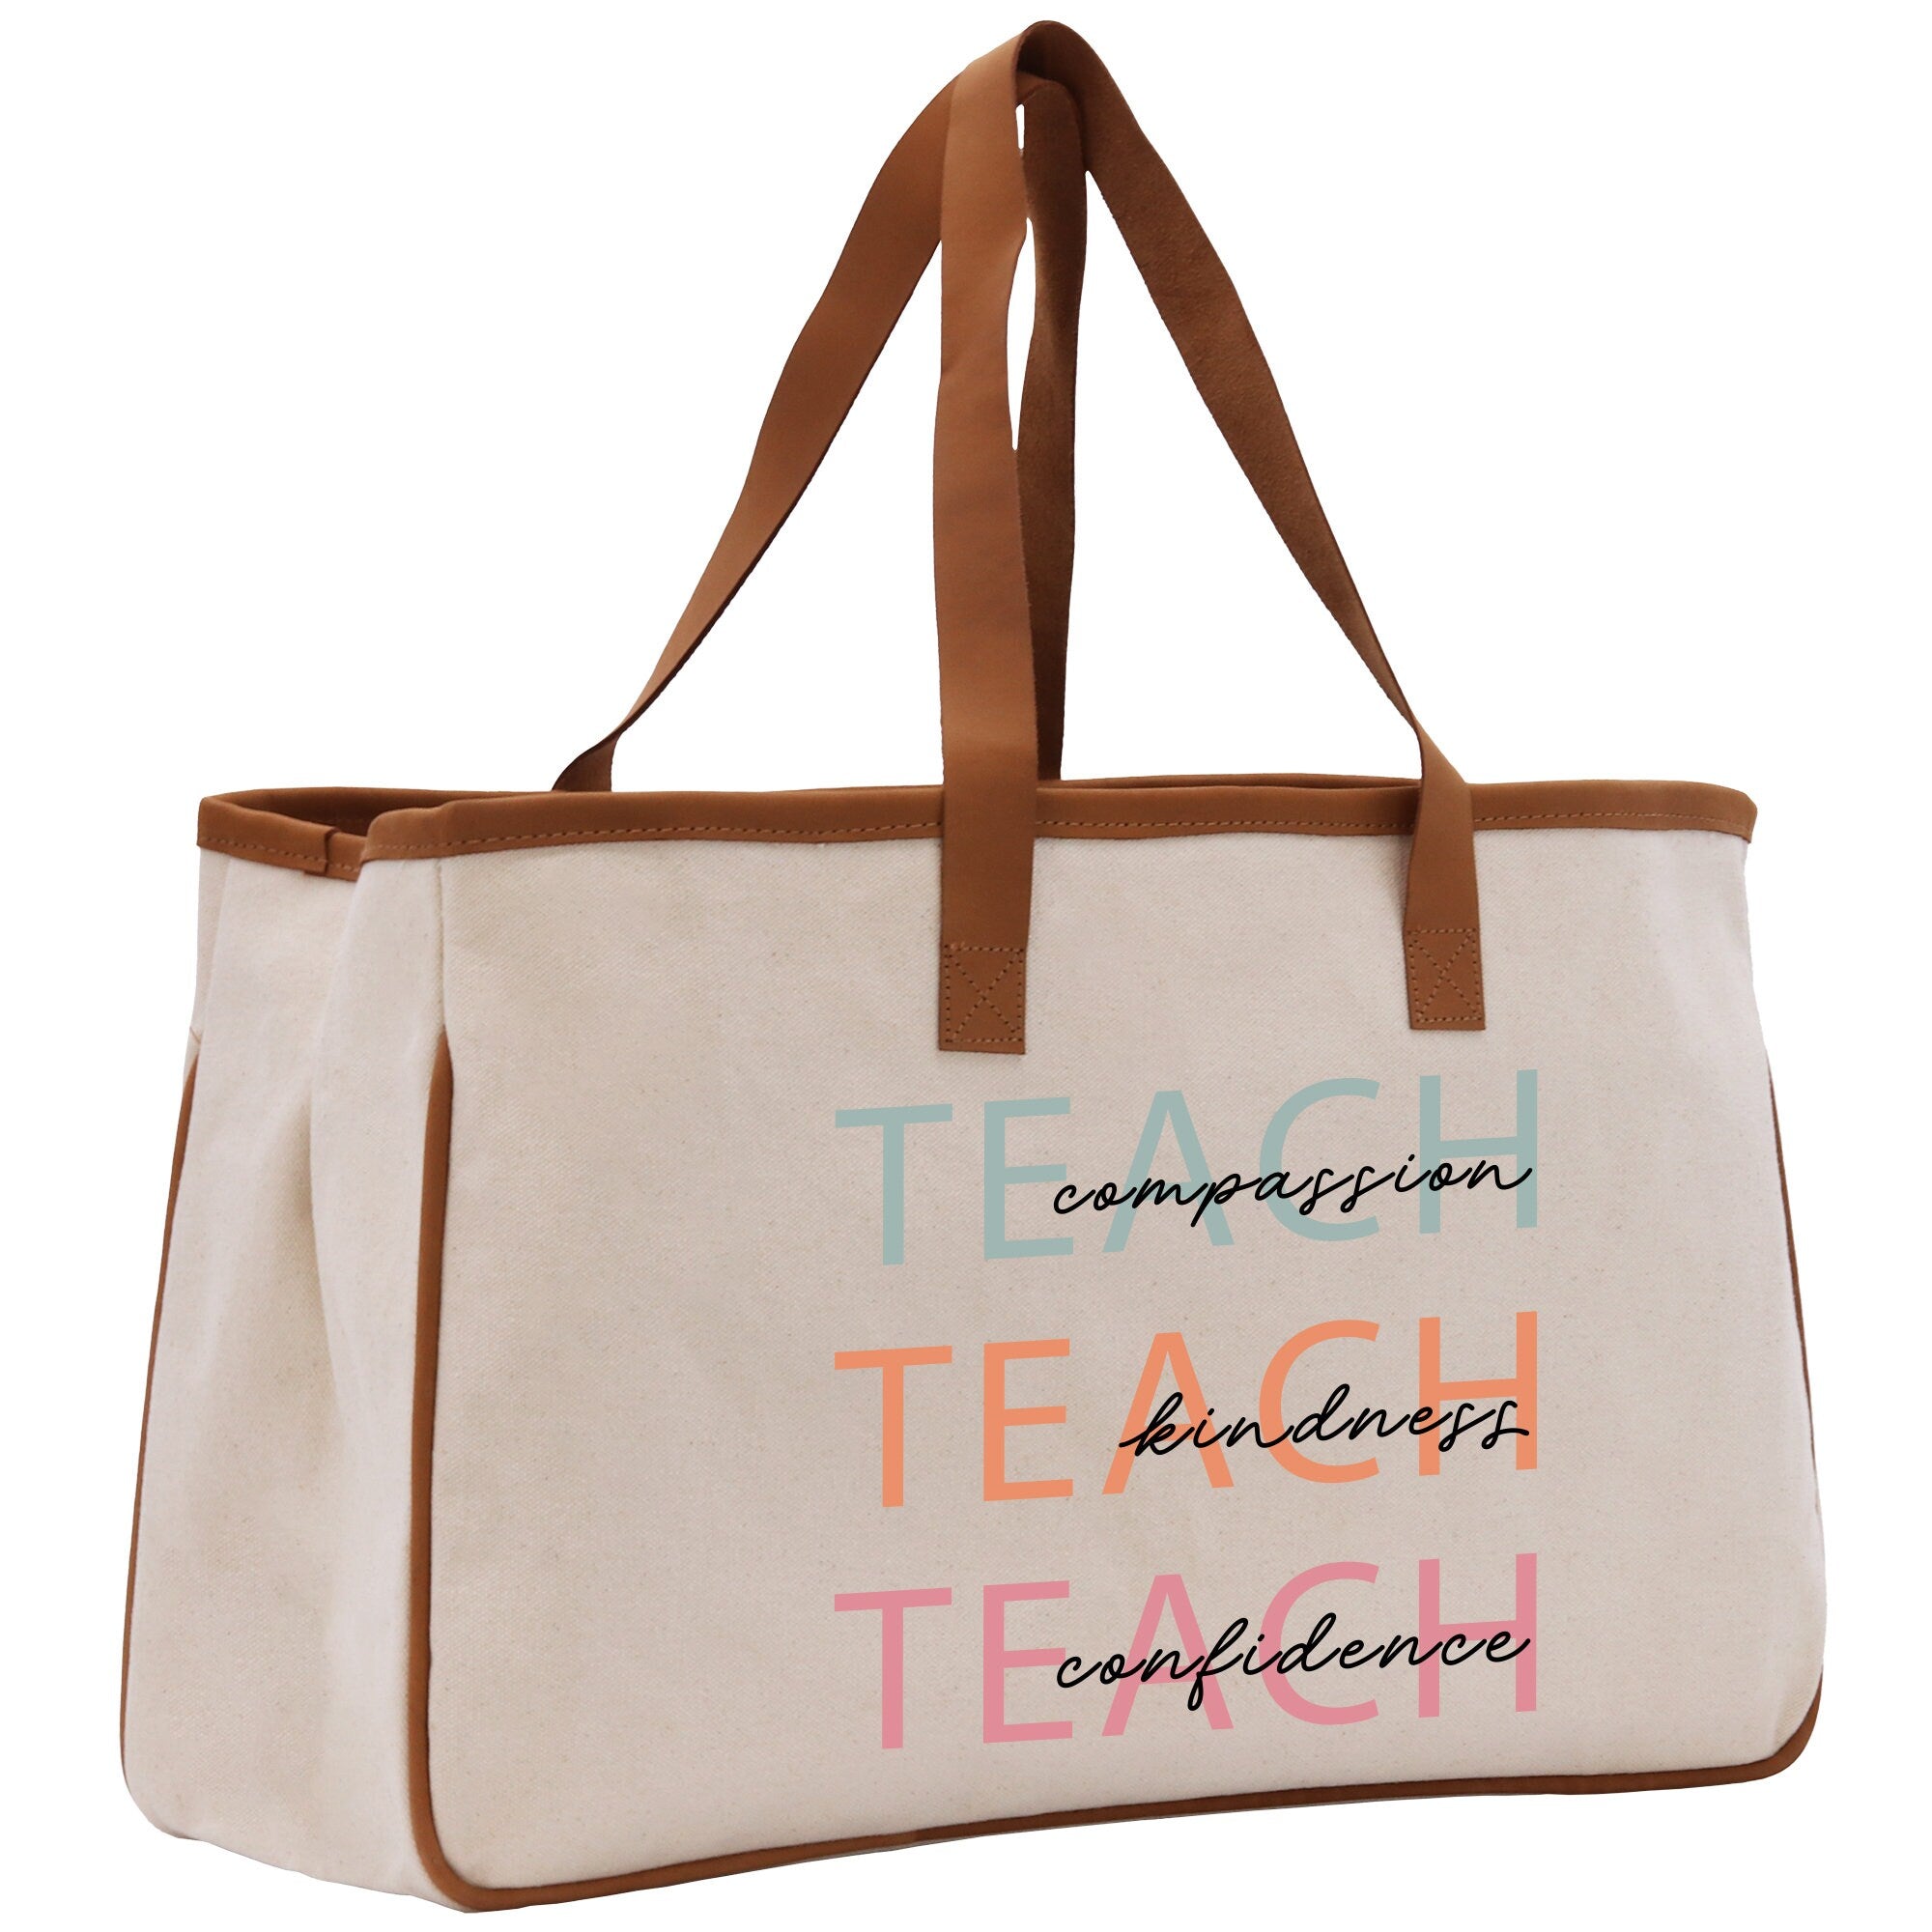 a canvas tote bag with the words teach on it